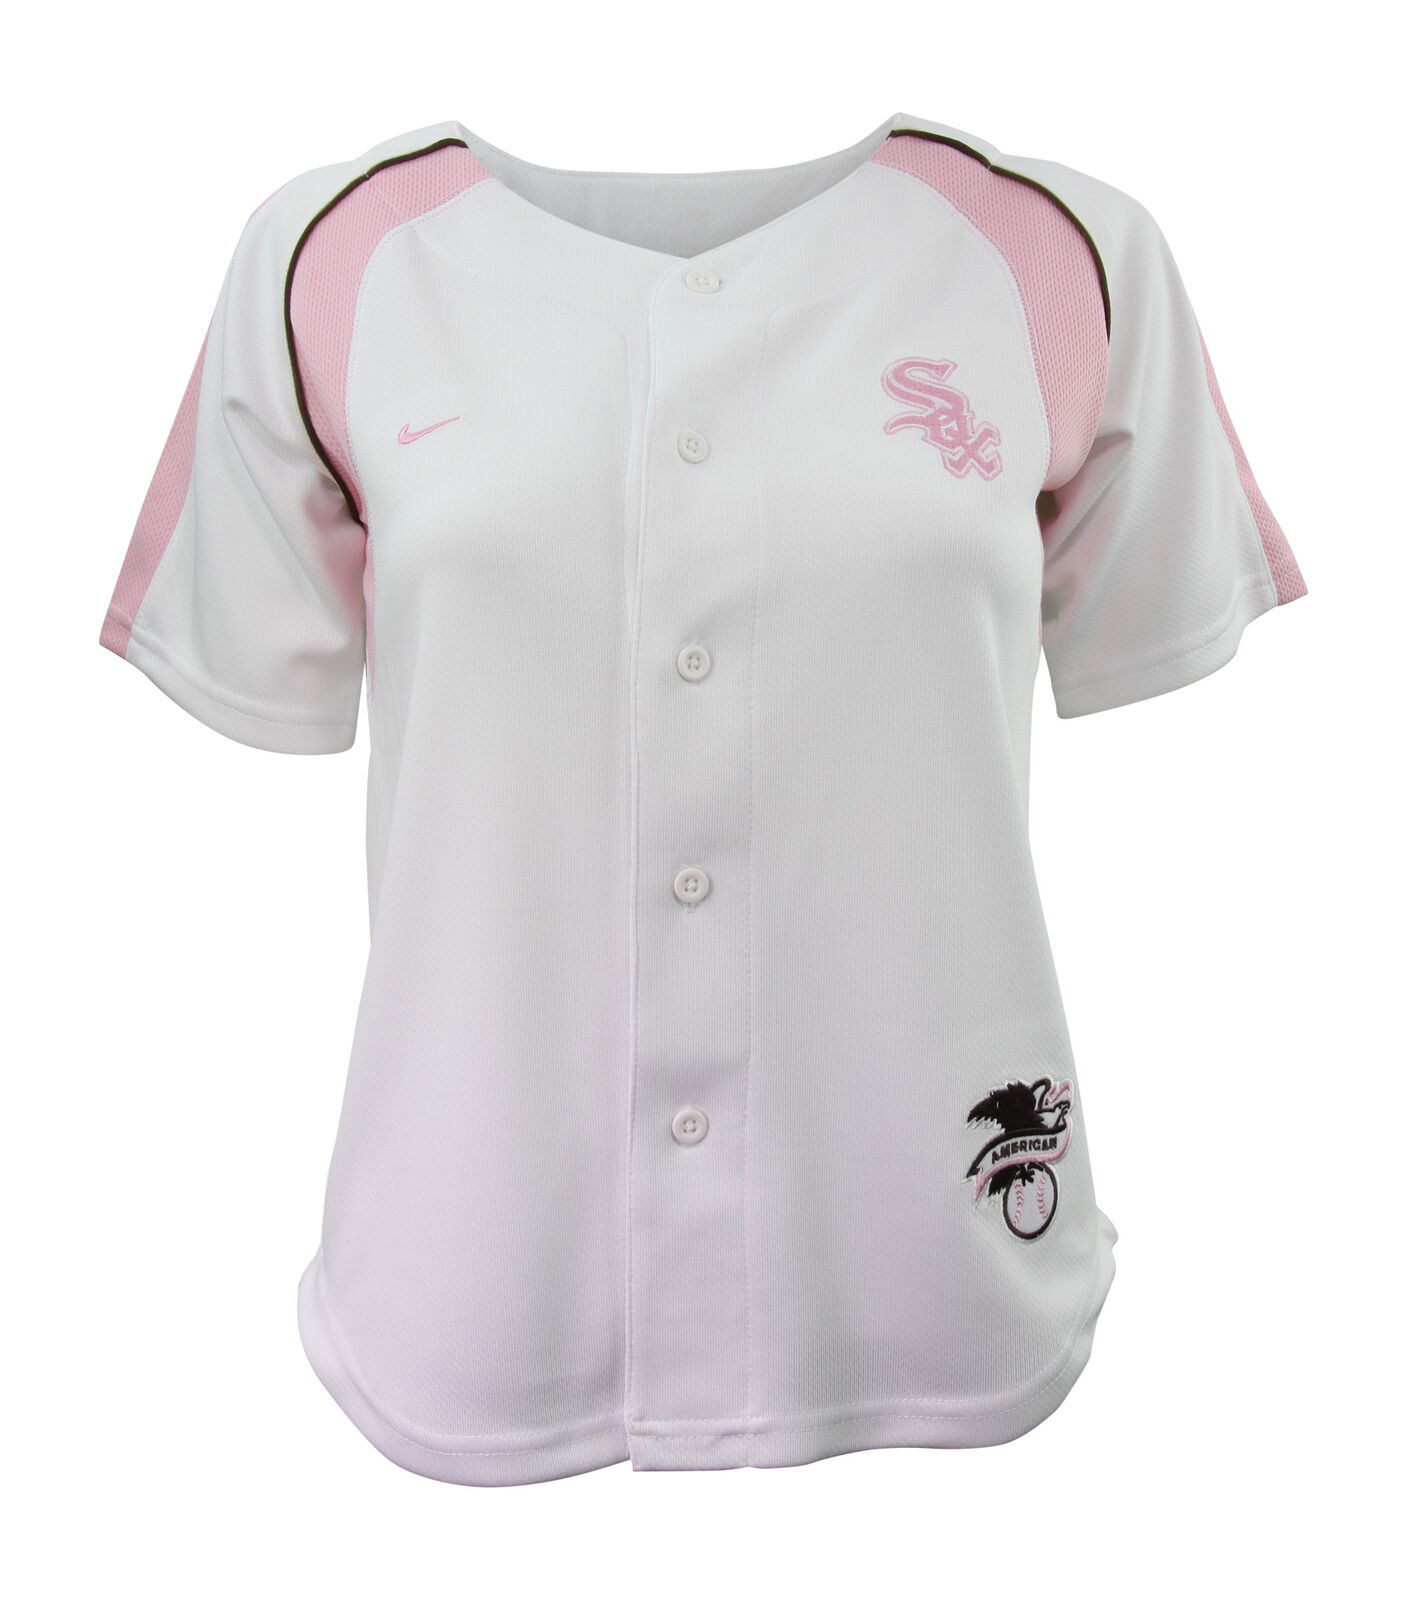 MLB Chicago White Sox Women's White and Pink Jersey by Nike